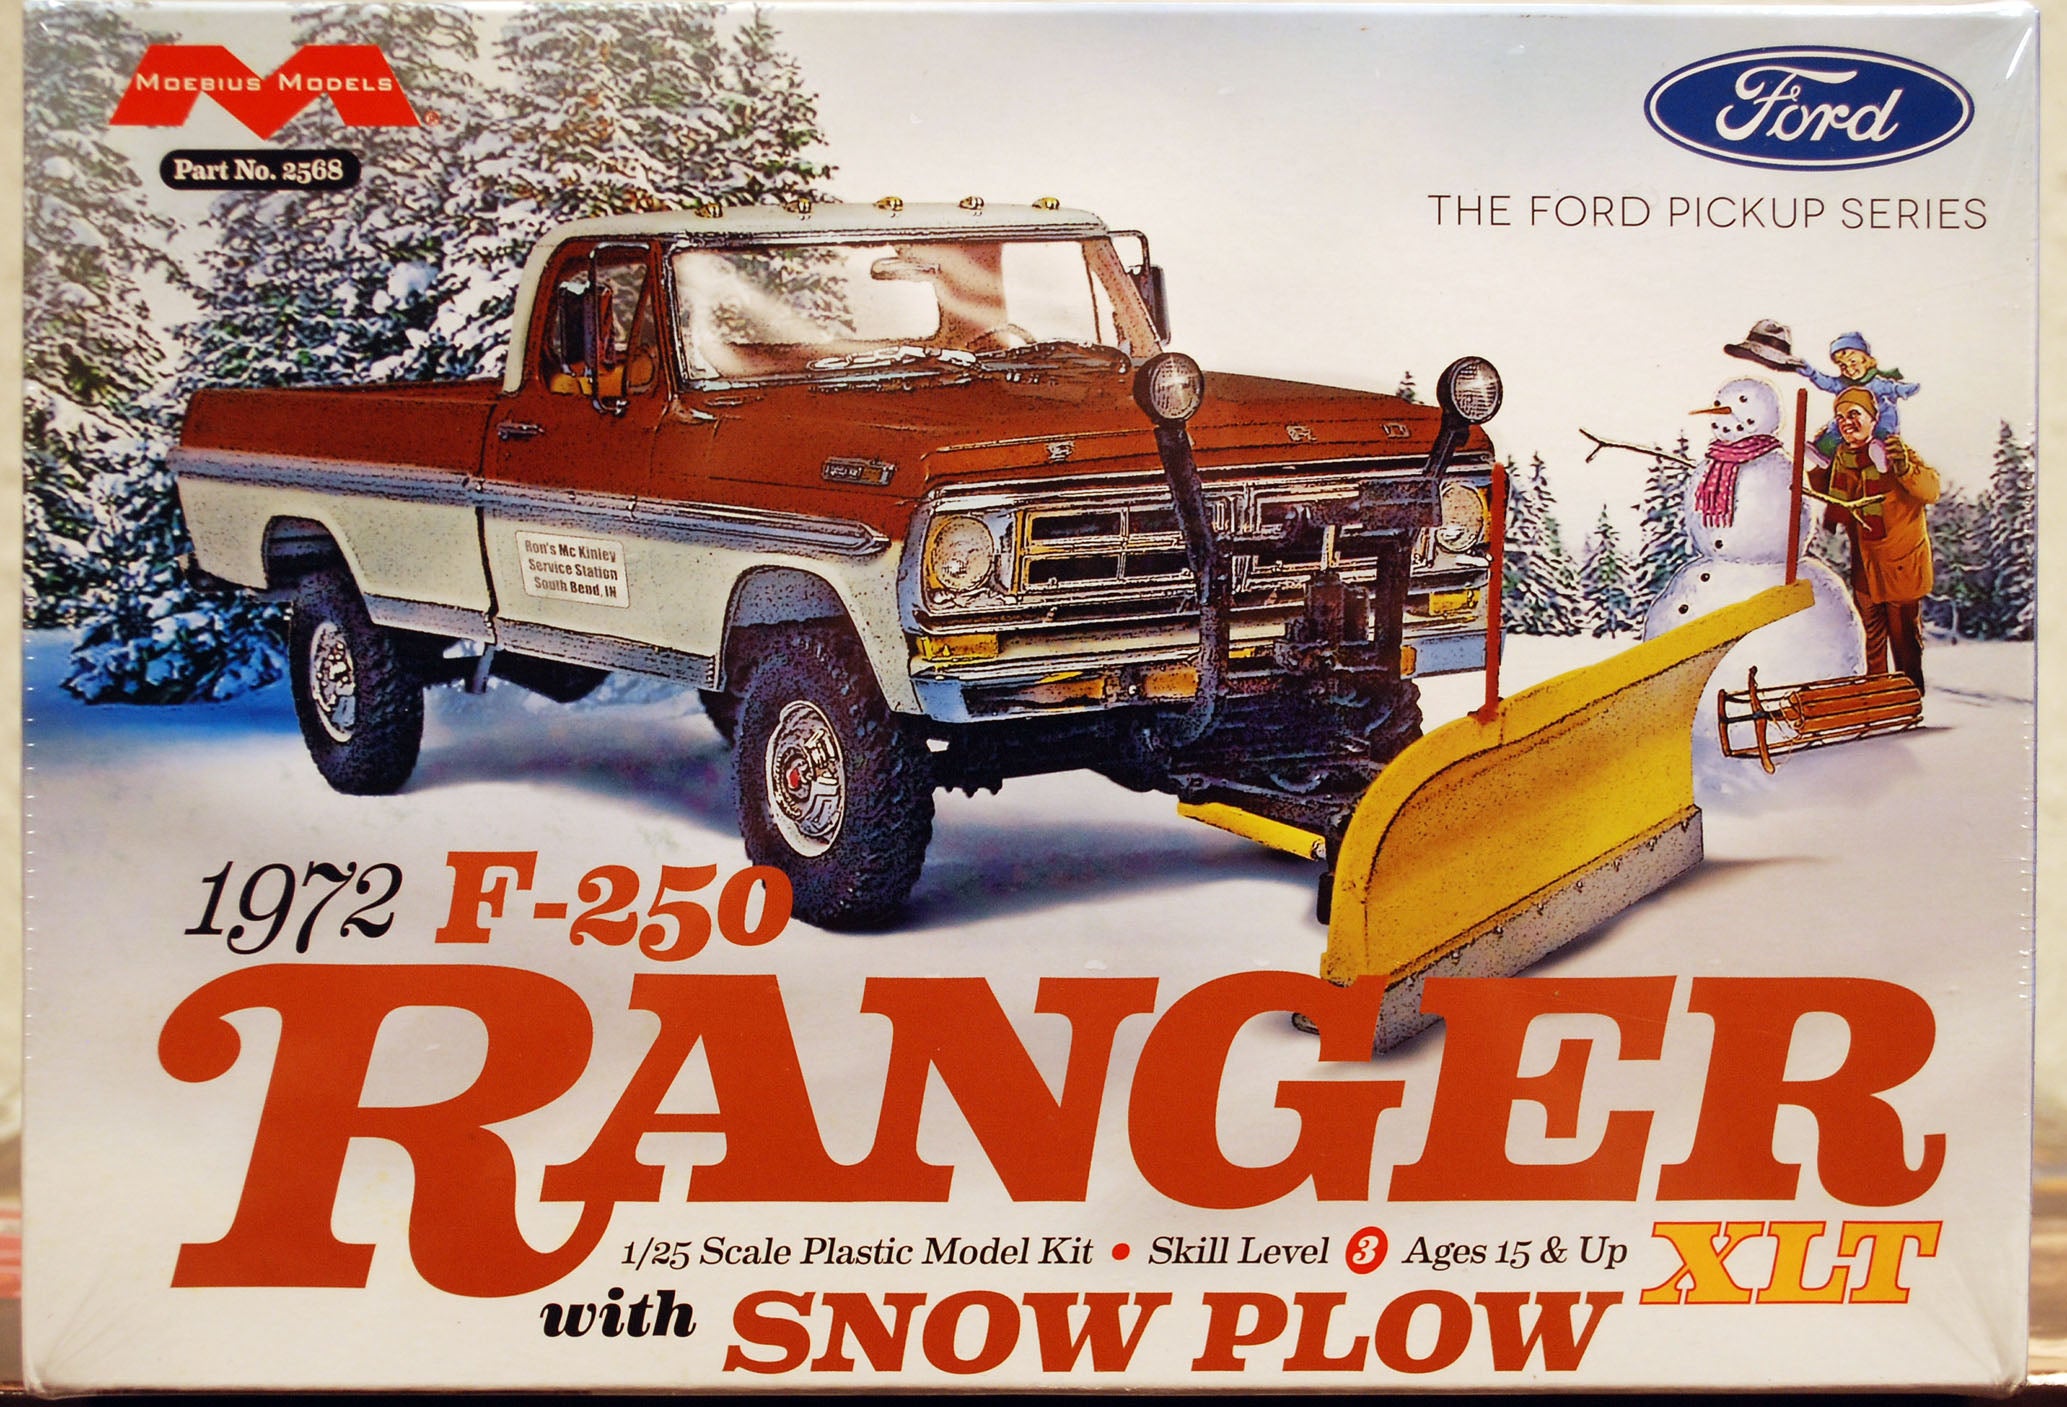 Moebius Models 2568 1972 Ford F-250 4x4 with Snow Plow 1/25 Scale Model Kit